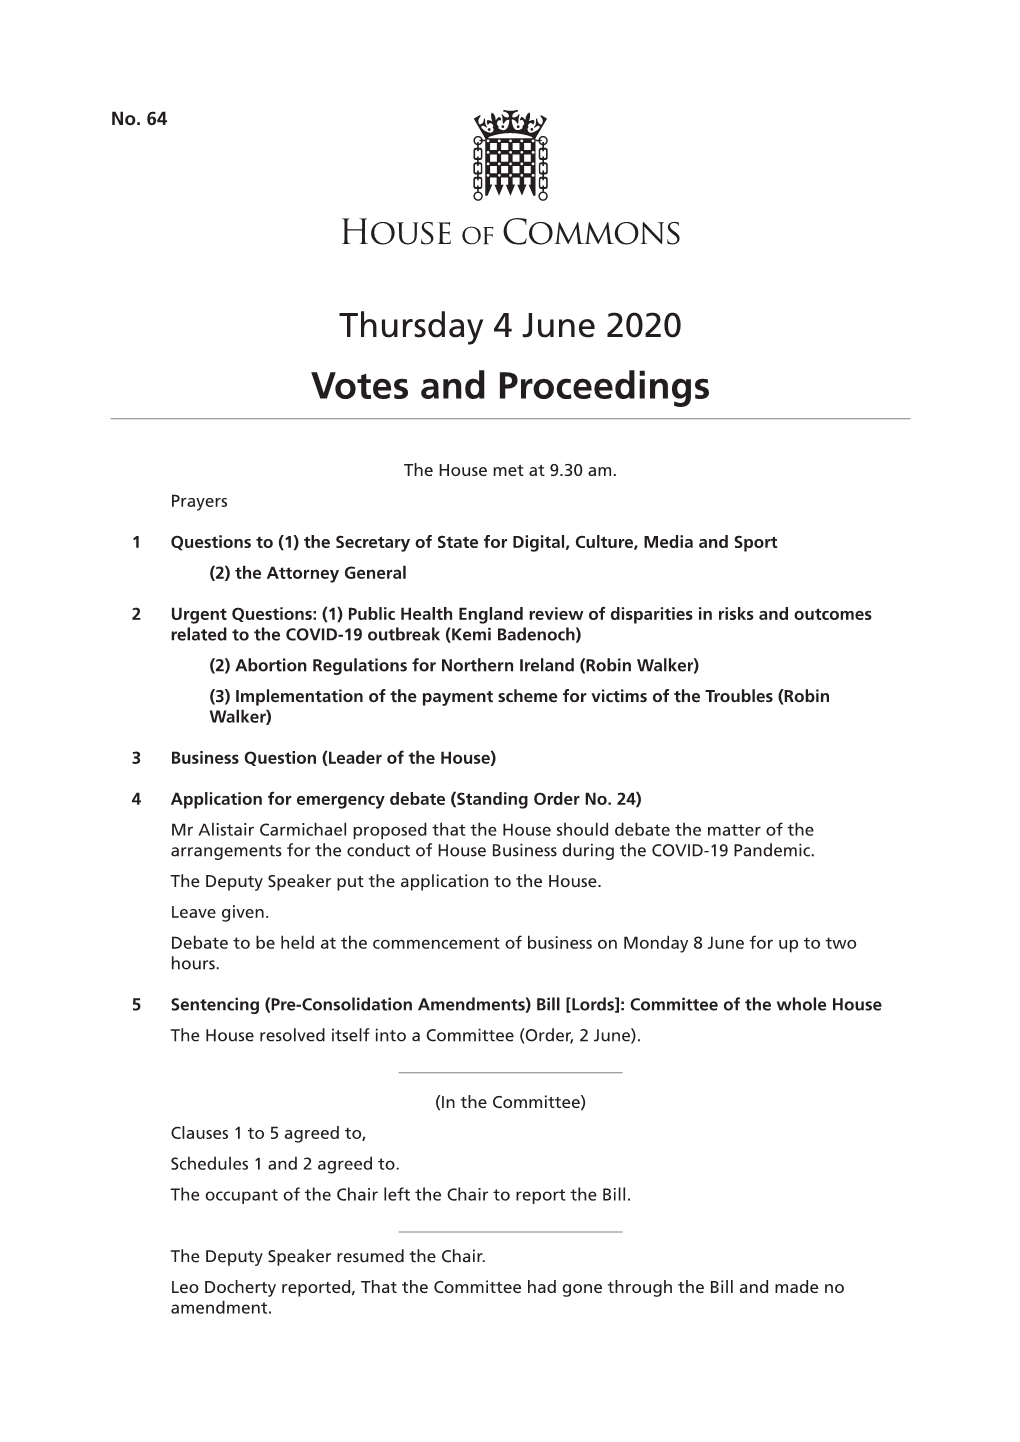 Thursday 4 June 2020 Votes and Proceedings